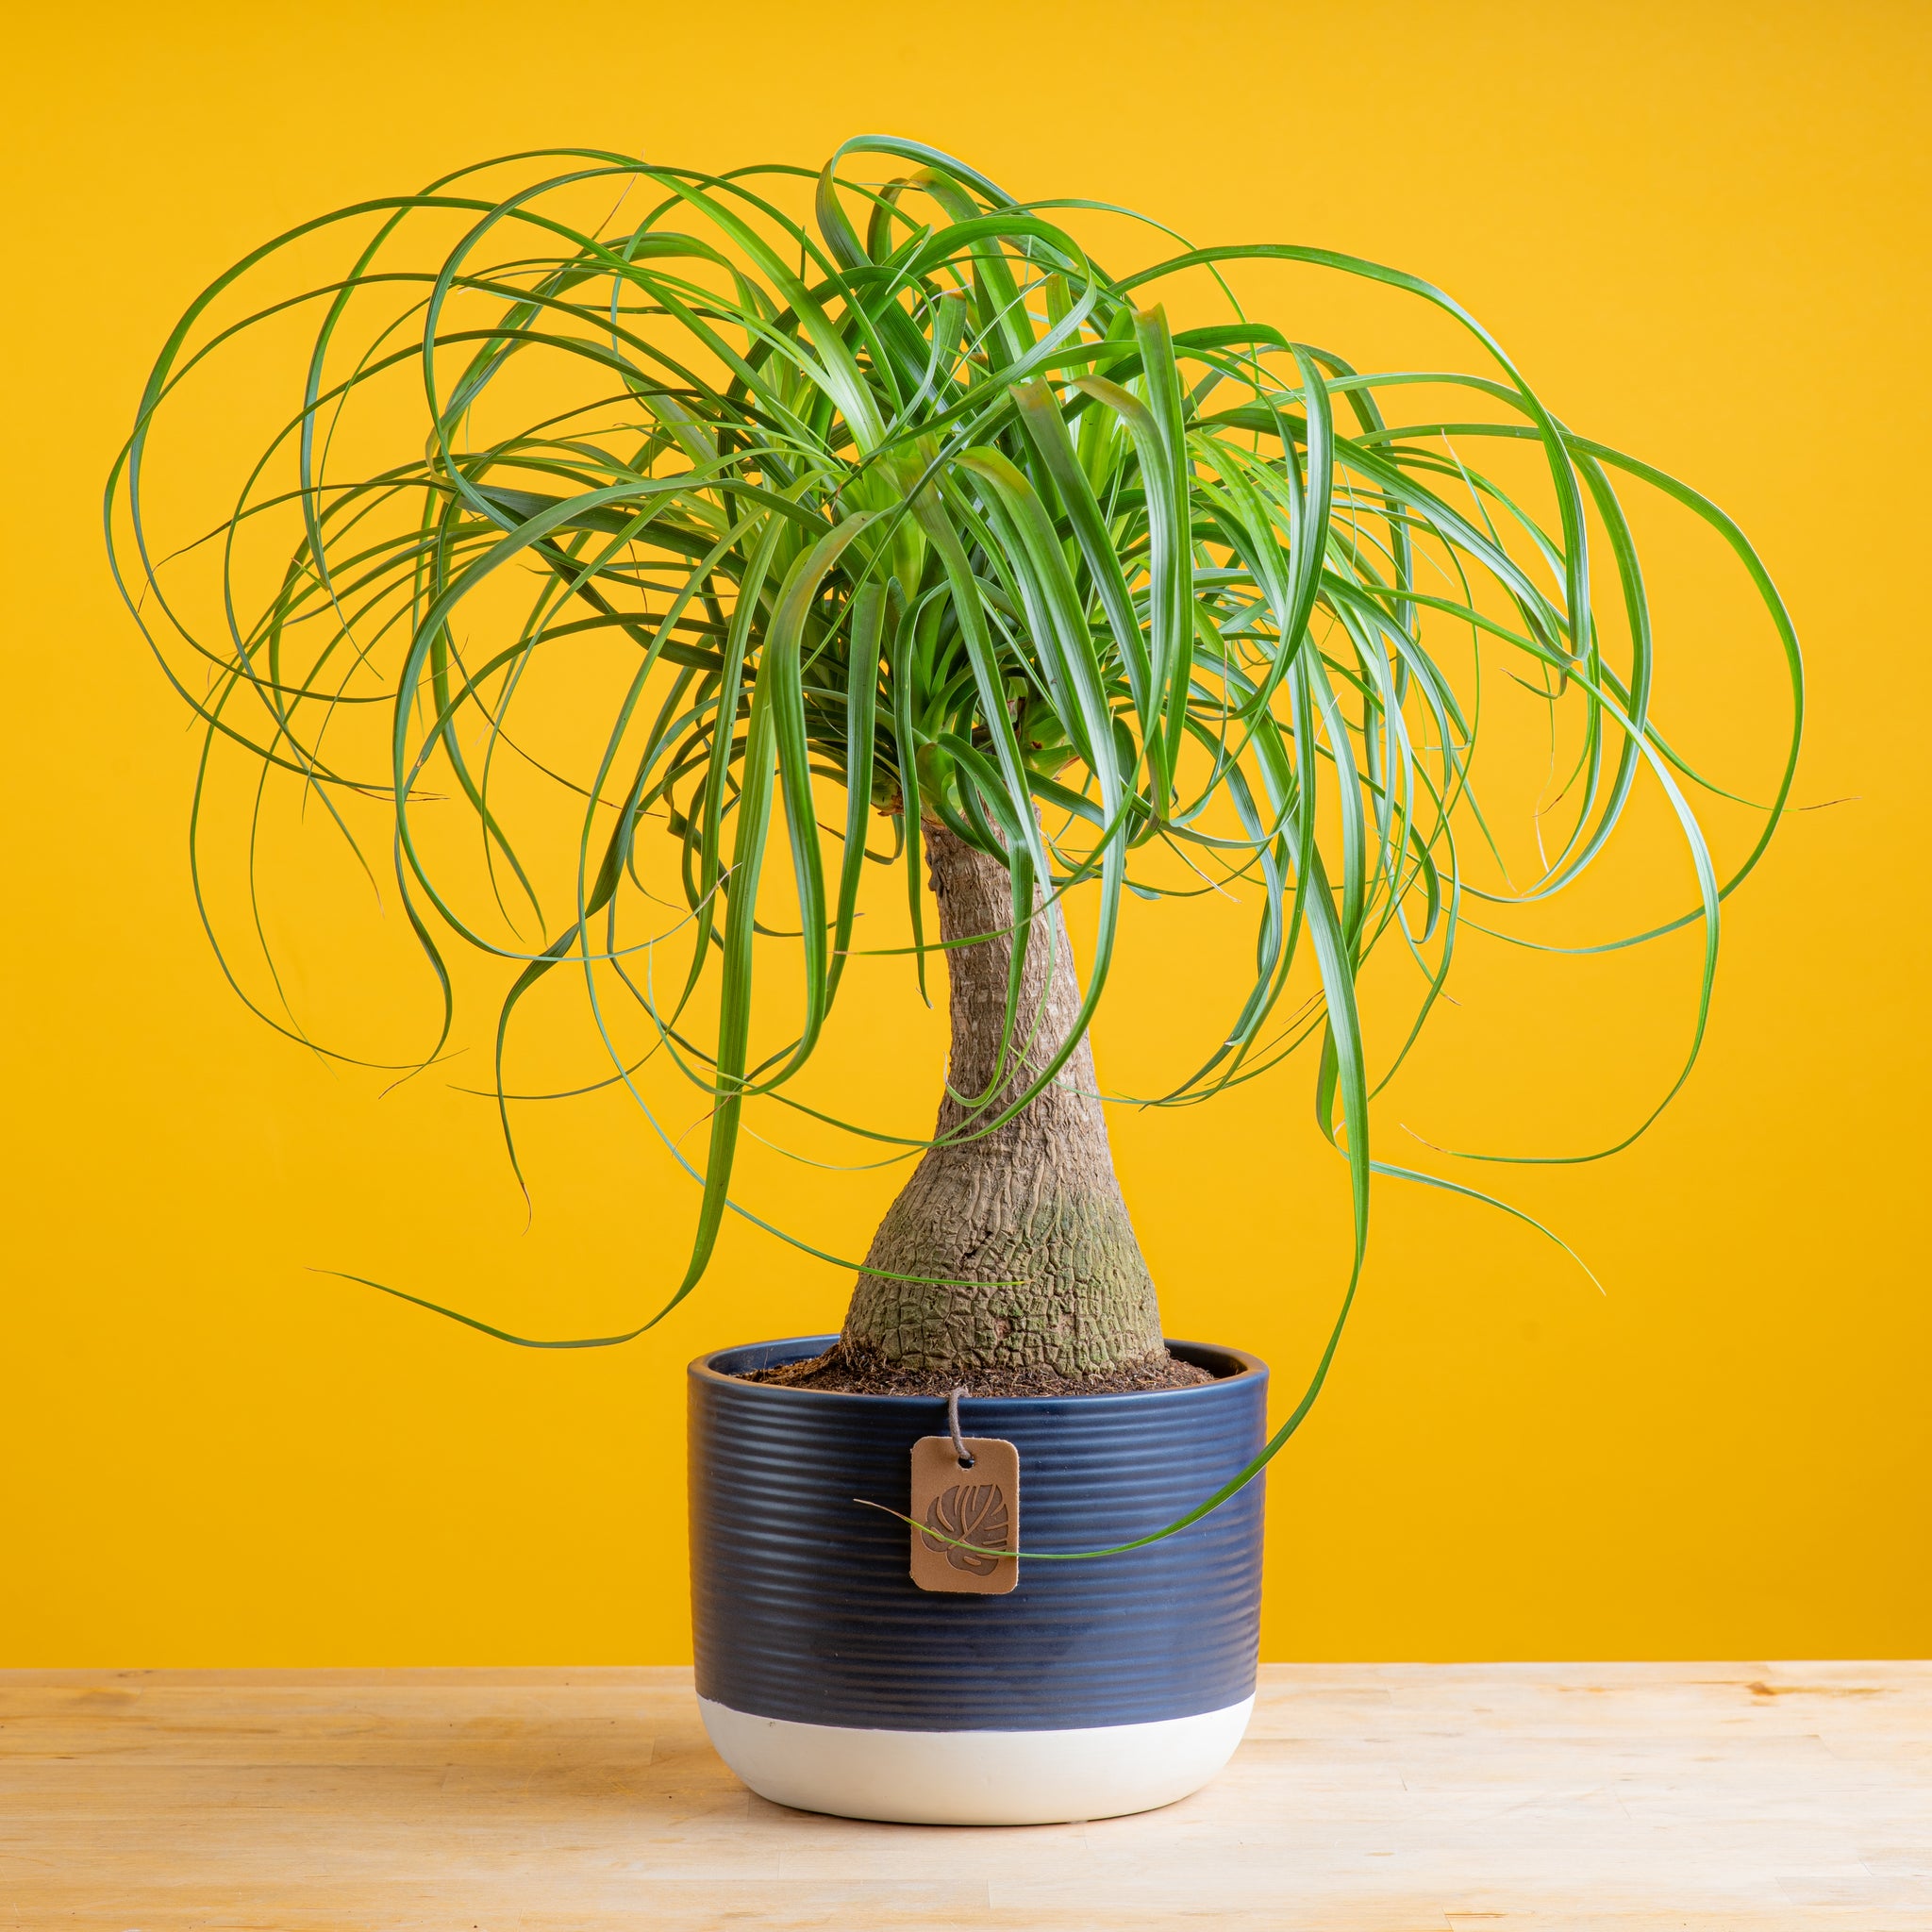 medium ponytail palm in a two tone navy and white ceramic planter, set against a bright yellow background